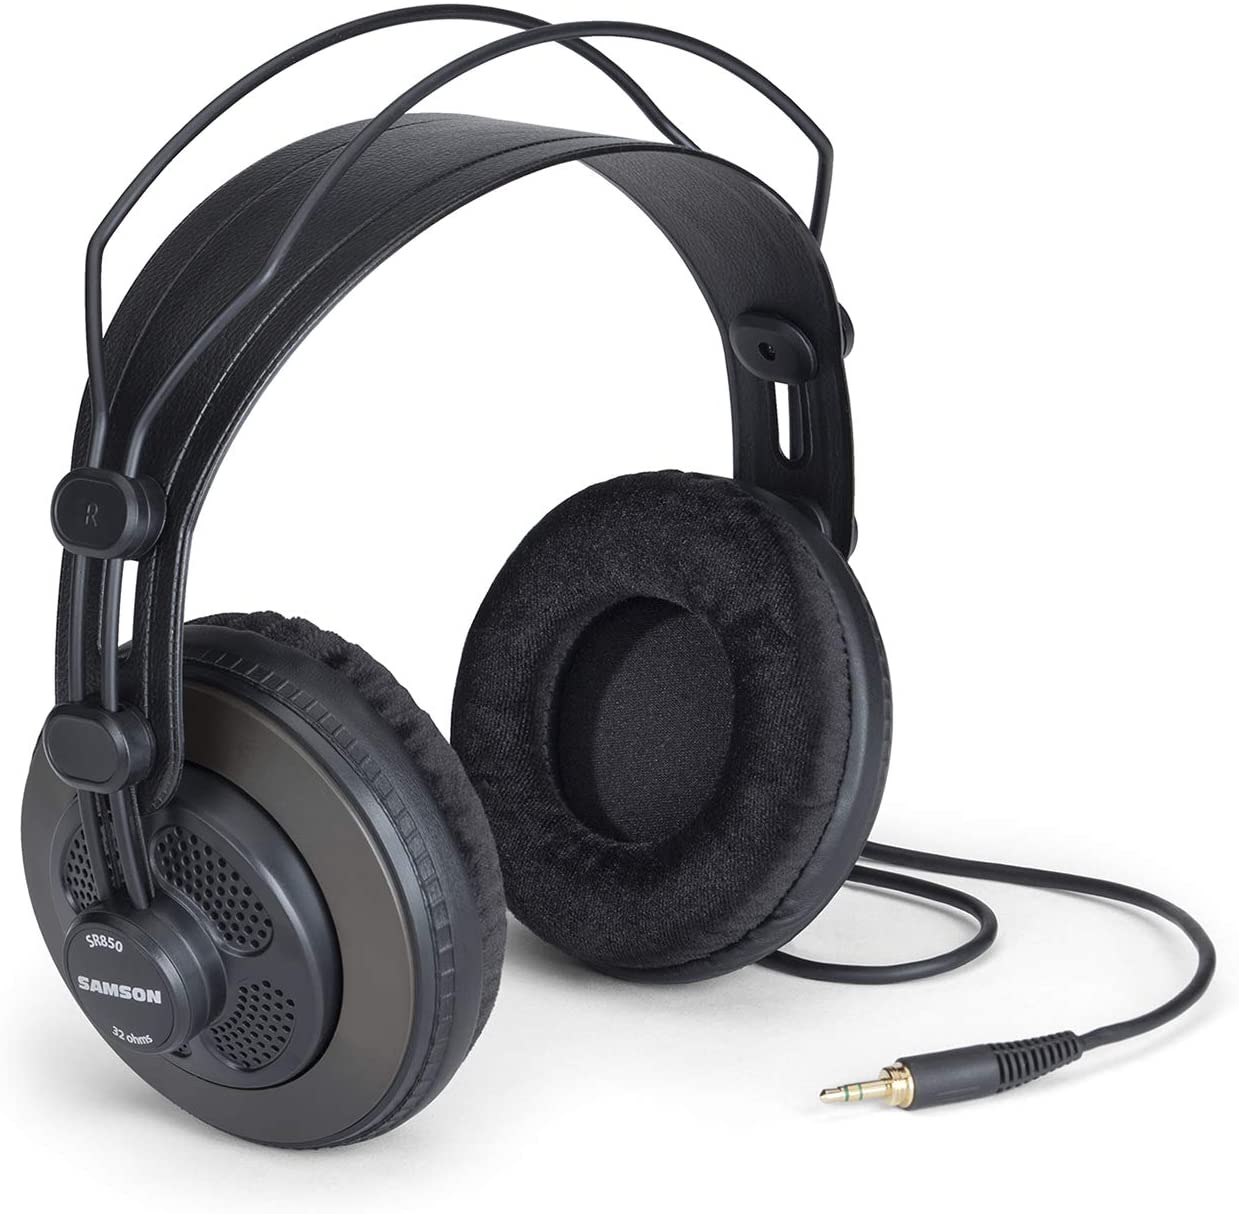 Samson SR850 Studio Wired Over-The-Ear Headphones with High Resolution Audio features (Available in Single or Pair) for Professional Recording and Hi-fi Monitoring